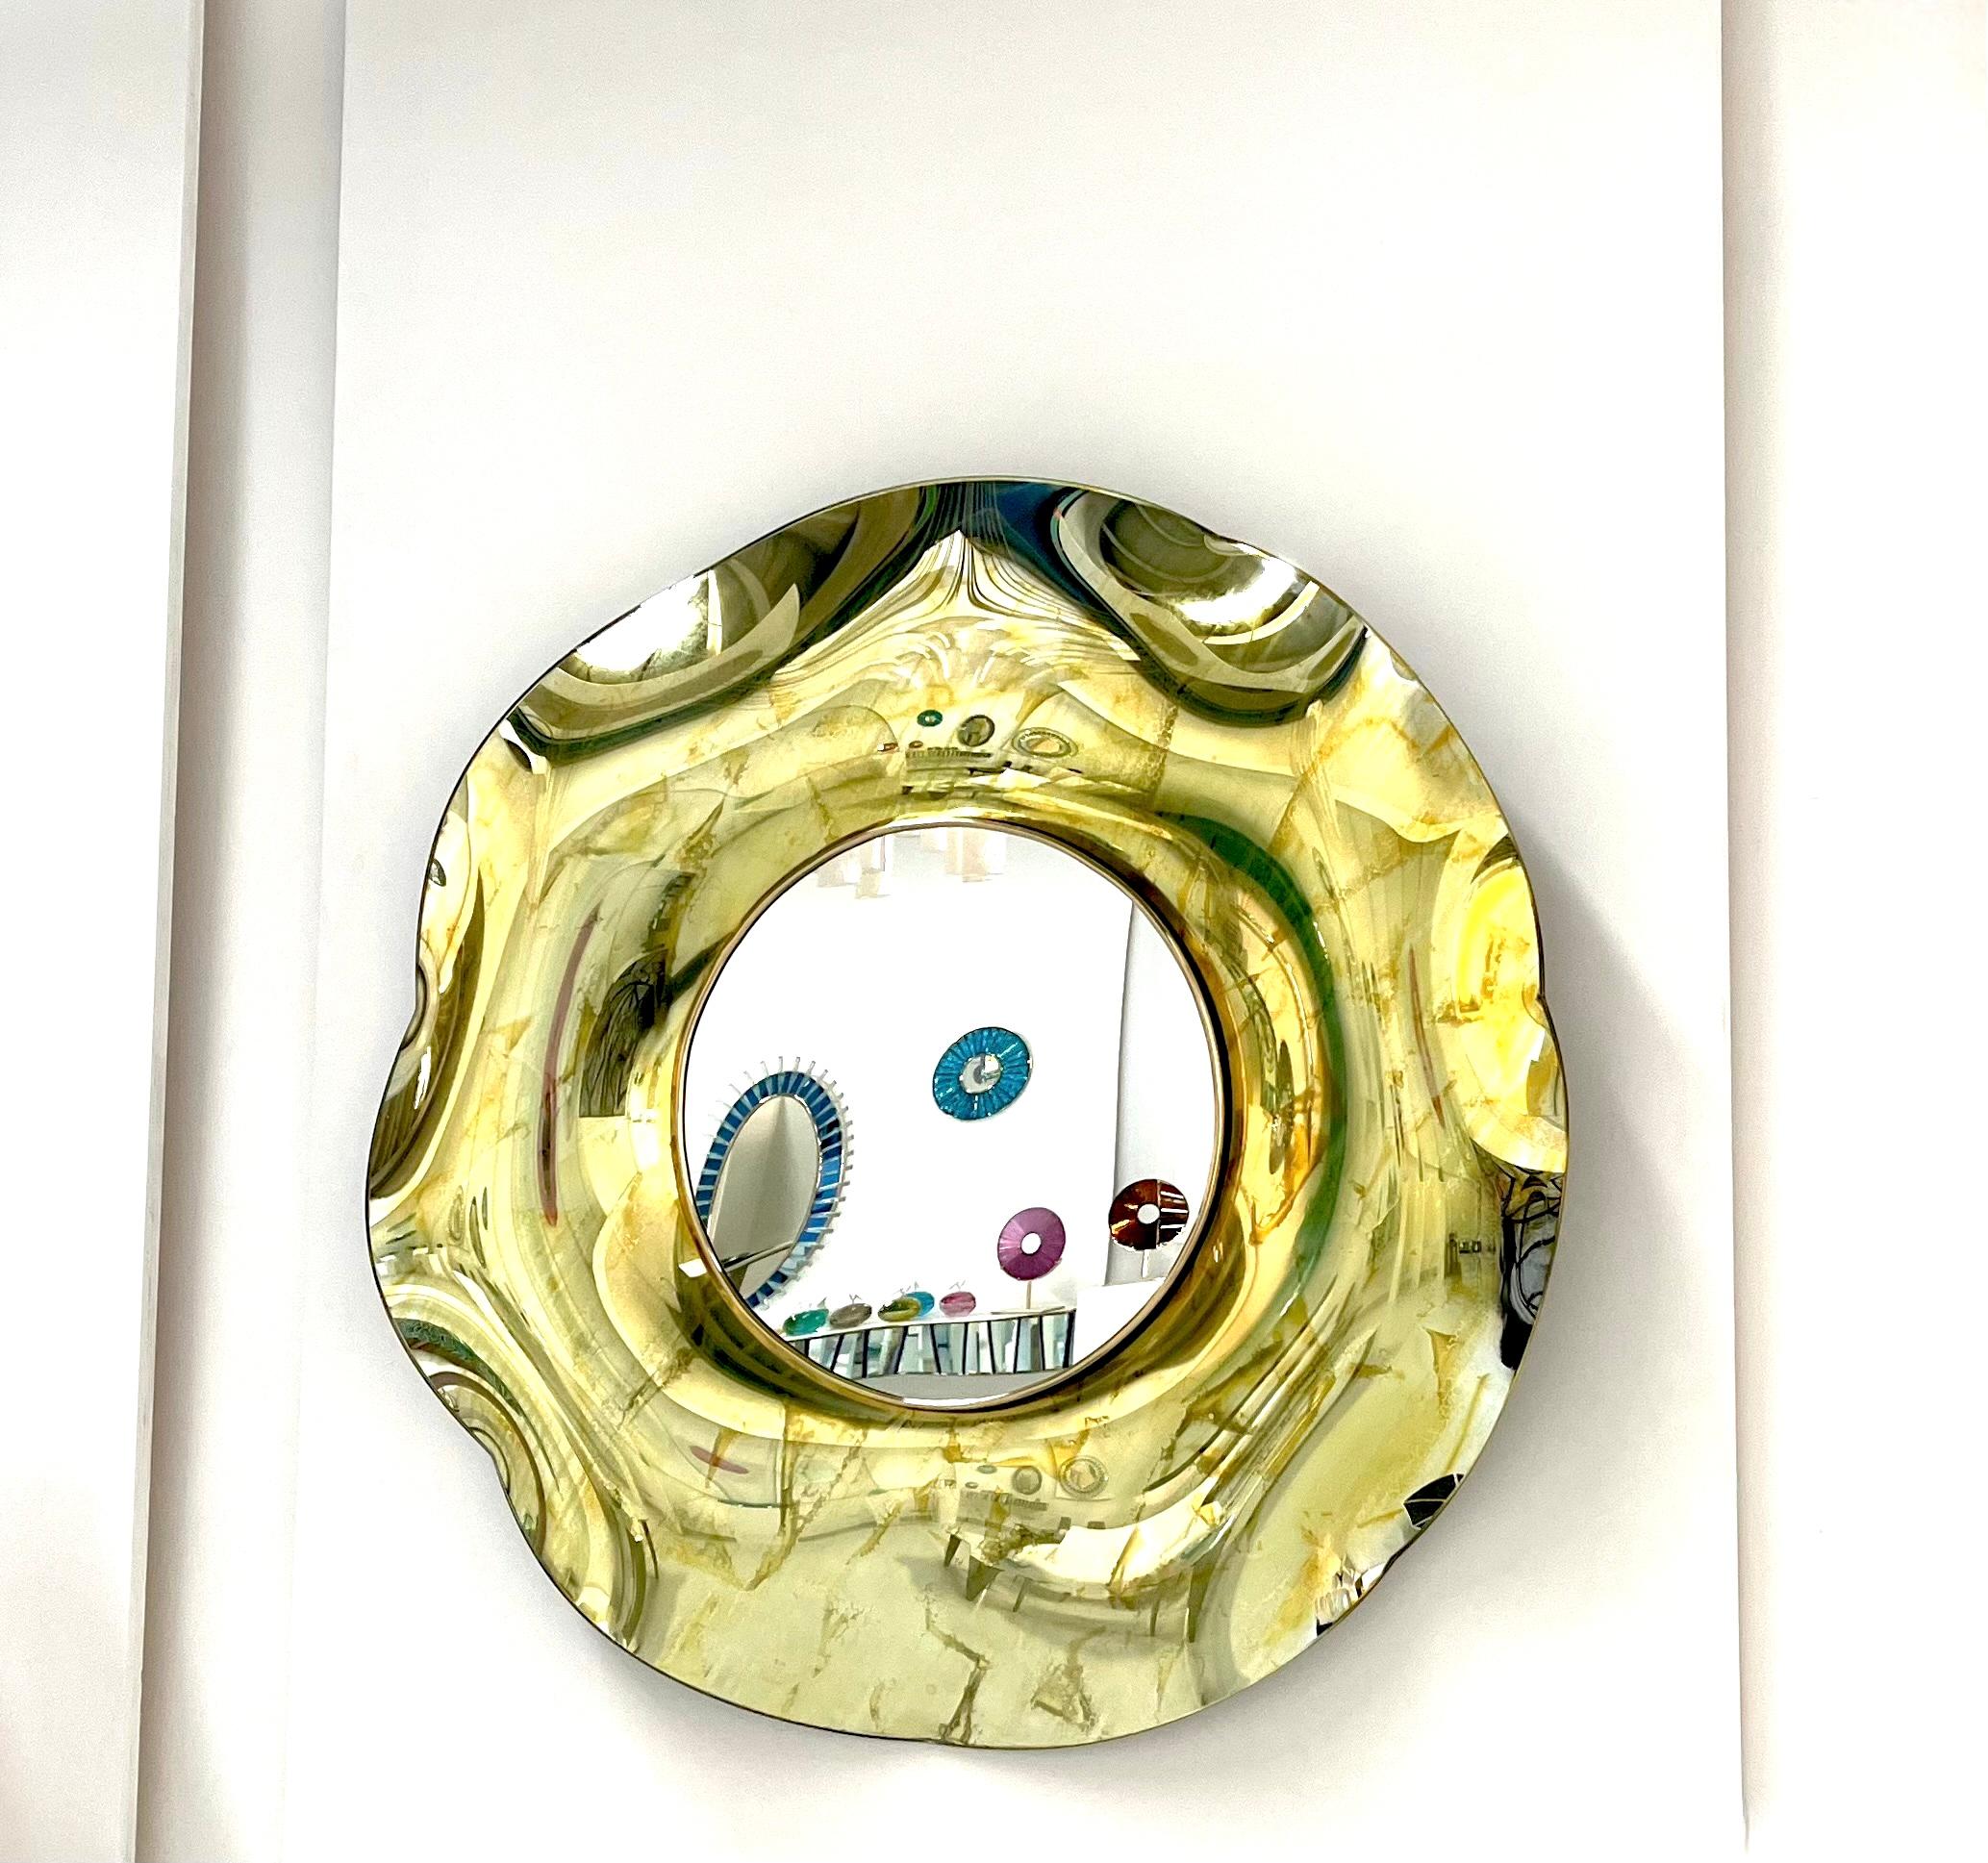 Contemporary 'Undulate' Handmade Gold Crystal Mirror Dia. 40'' by Ghiró Studio For Sale 2